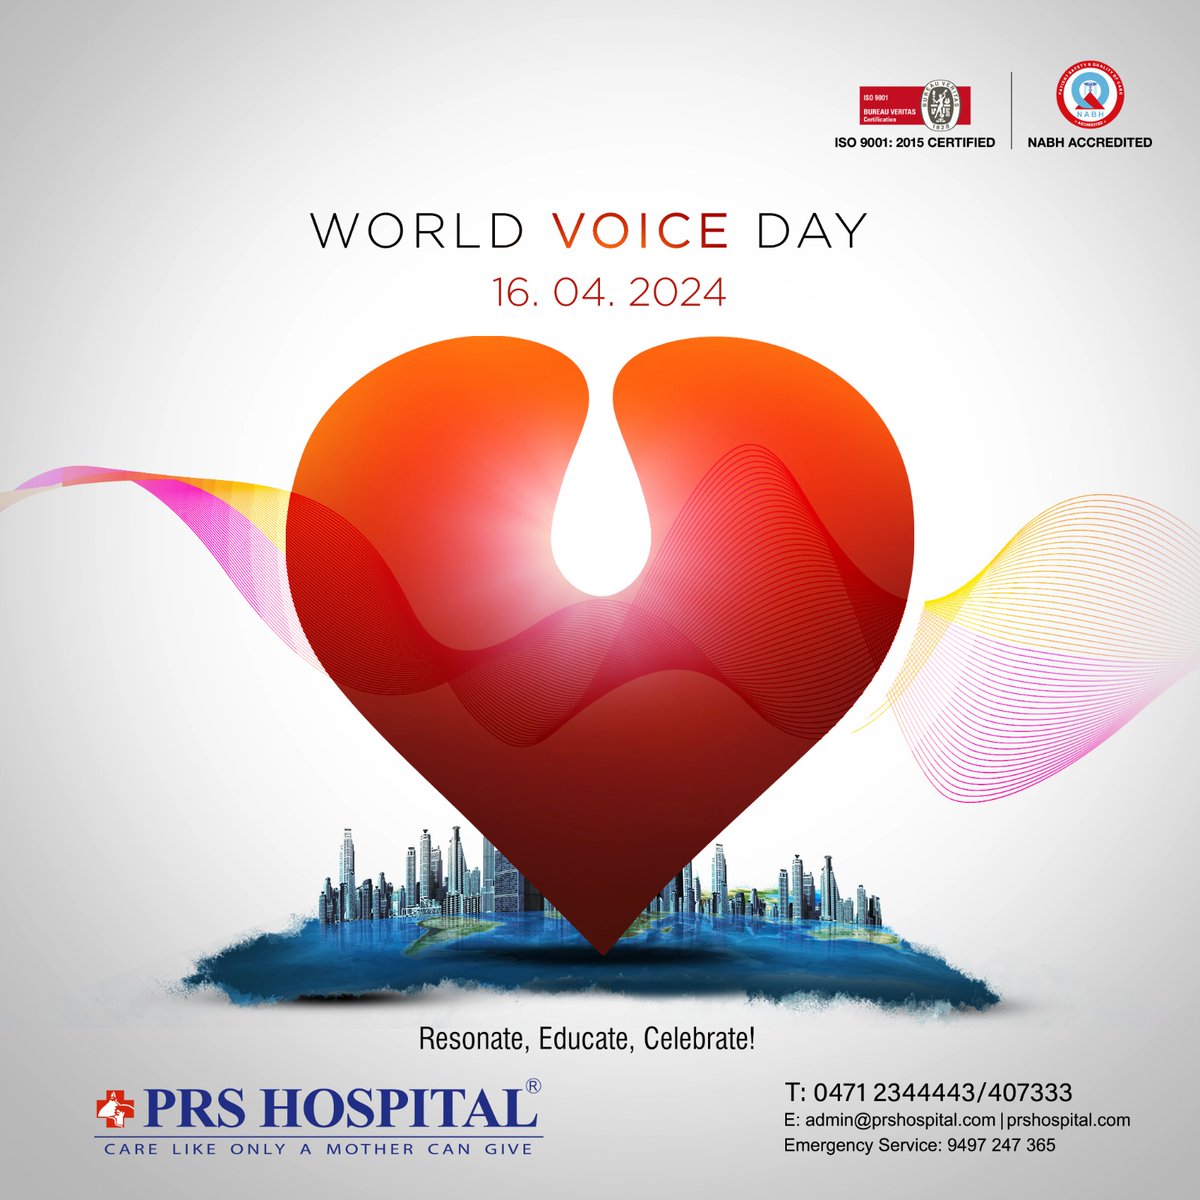 'Let your voice be the melody that resonates through the world. Happy World Voice Day!'

#worldvoiceday #voiceday2024 #voice #resonate #celebrate #voicehealth #vocalcordshealth #healthyvocalcords #prshospital #besthospital